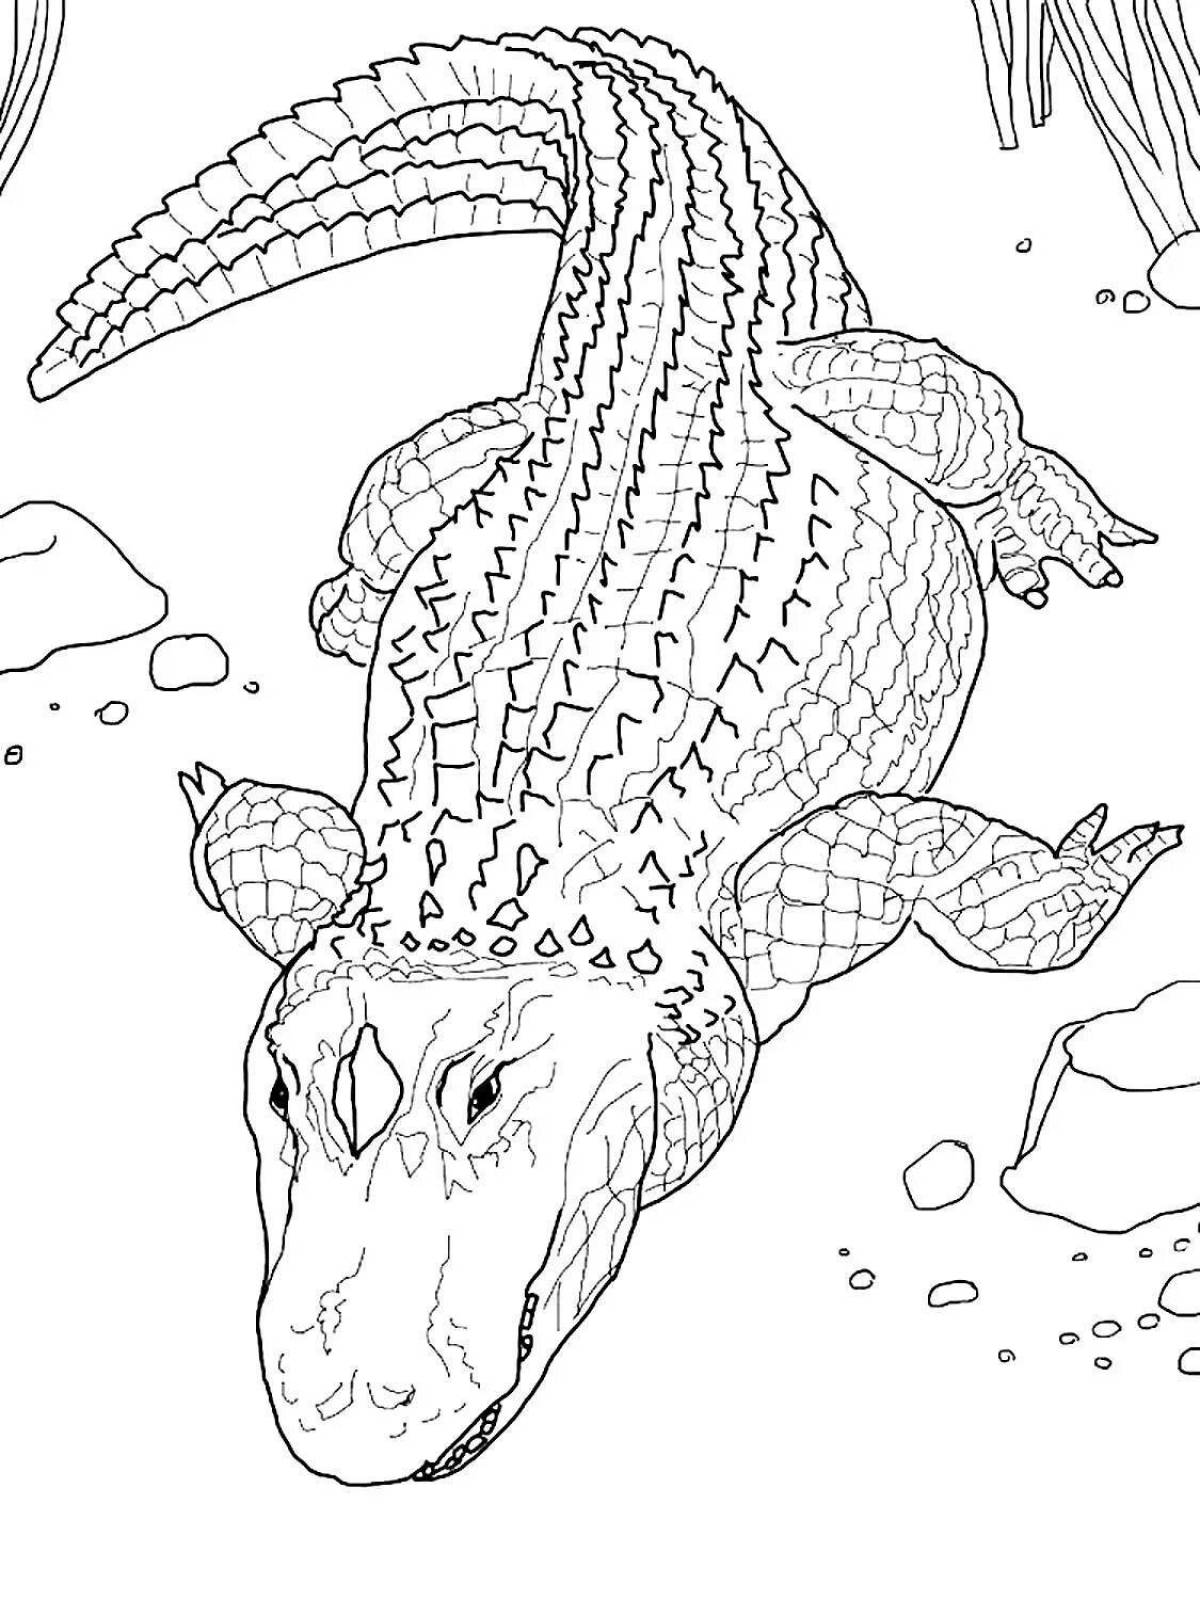 Majestic reptile coloring pages